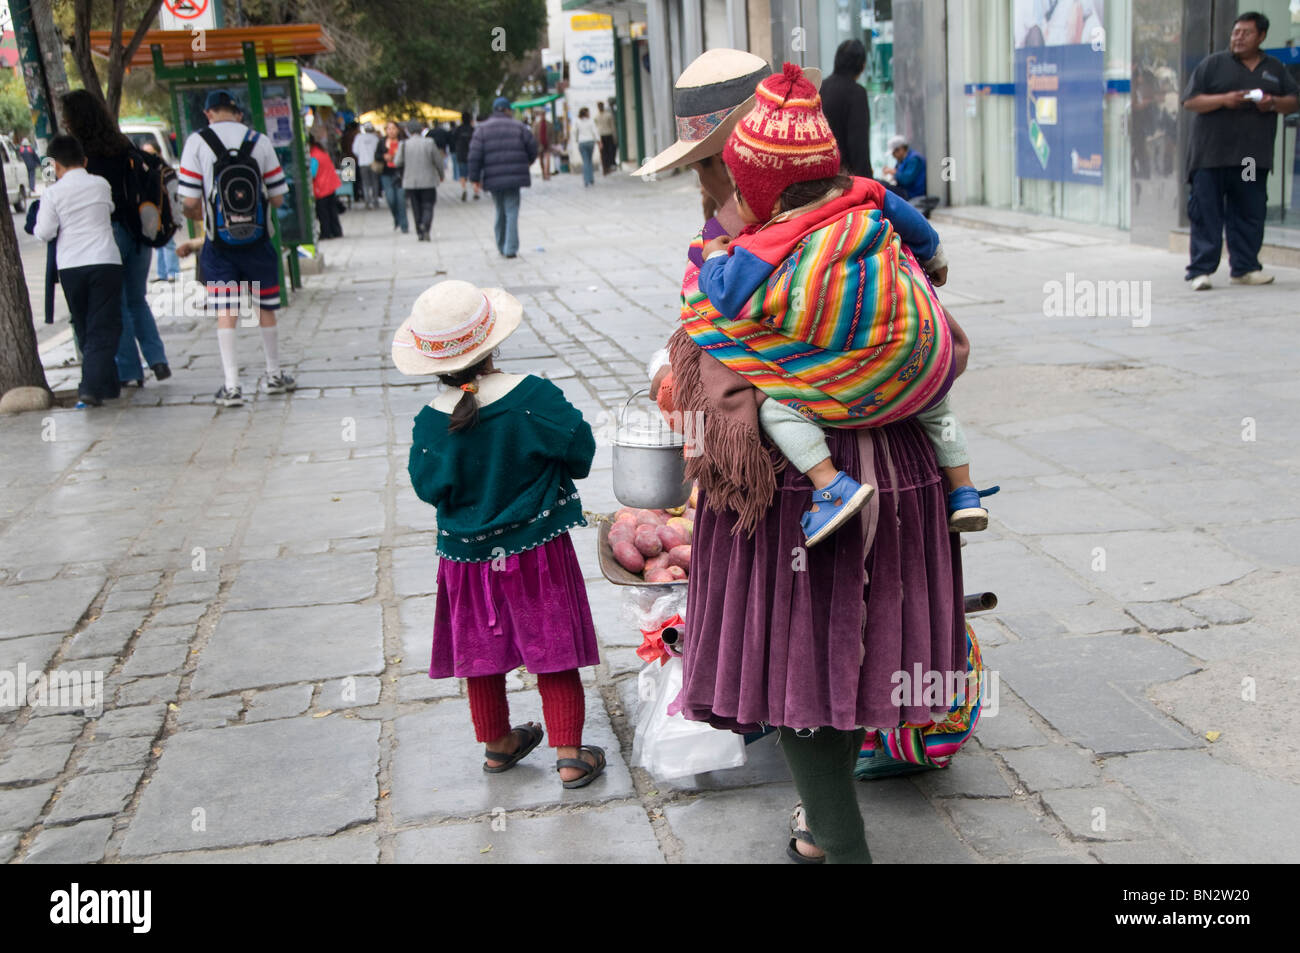 Magical Andes Photography  Aymara woman shopping at stall selling red and  yellow underwear on New Year's Eve, La Paz, Bolivia photograph